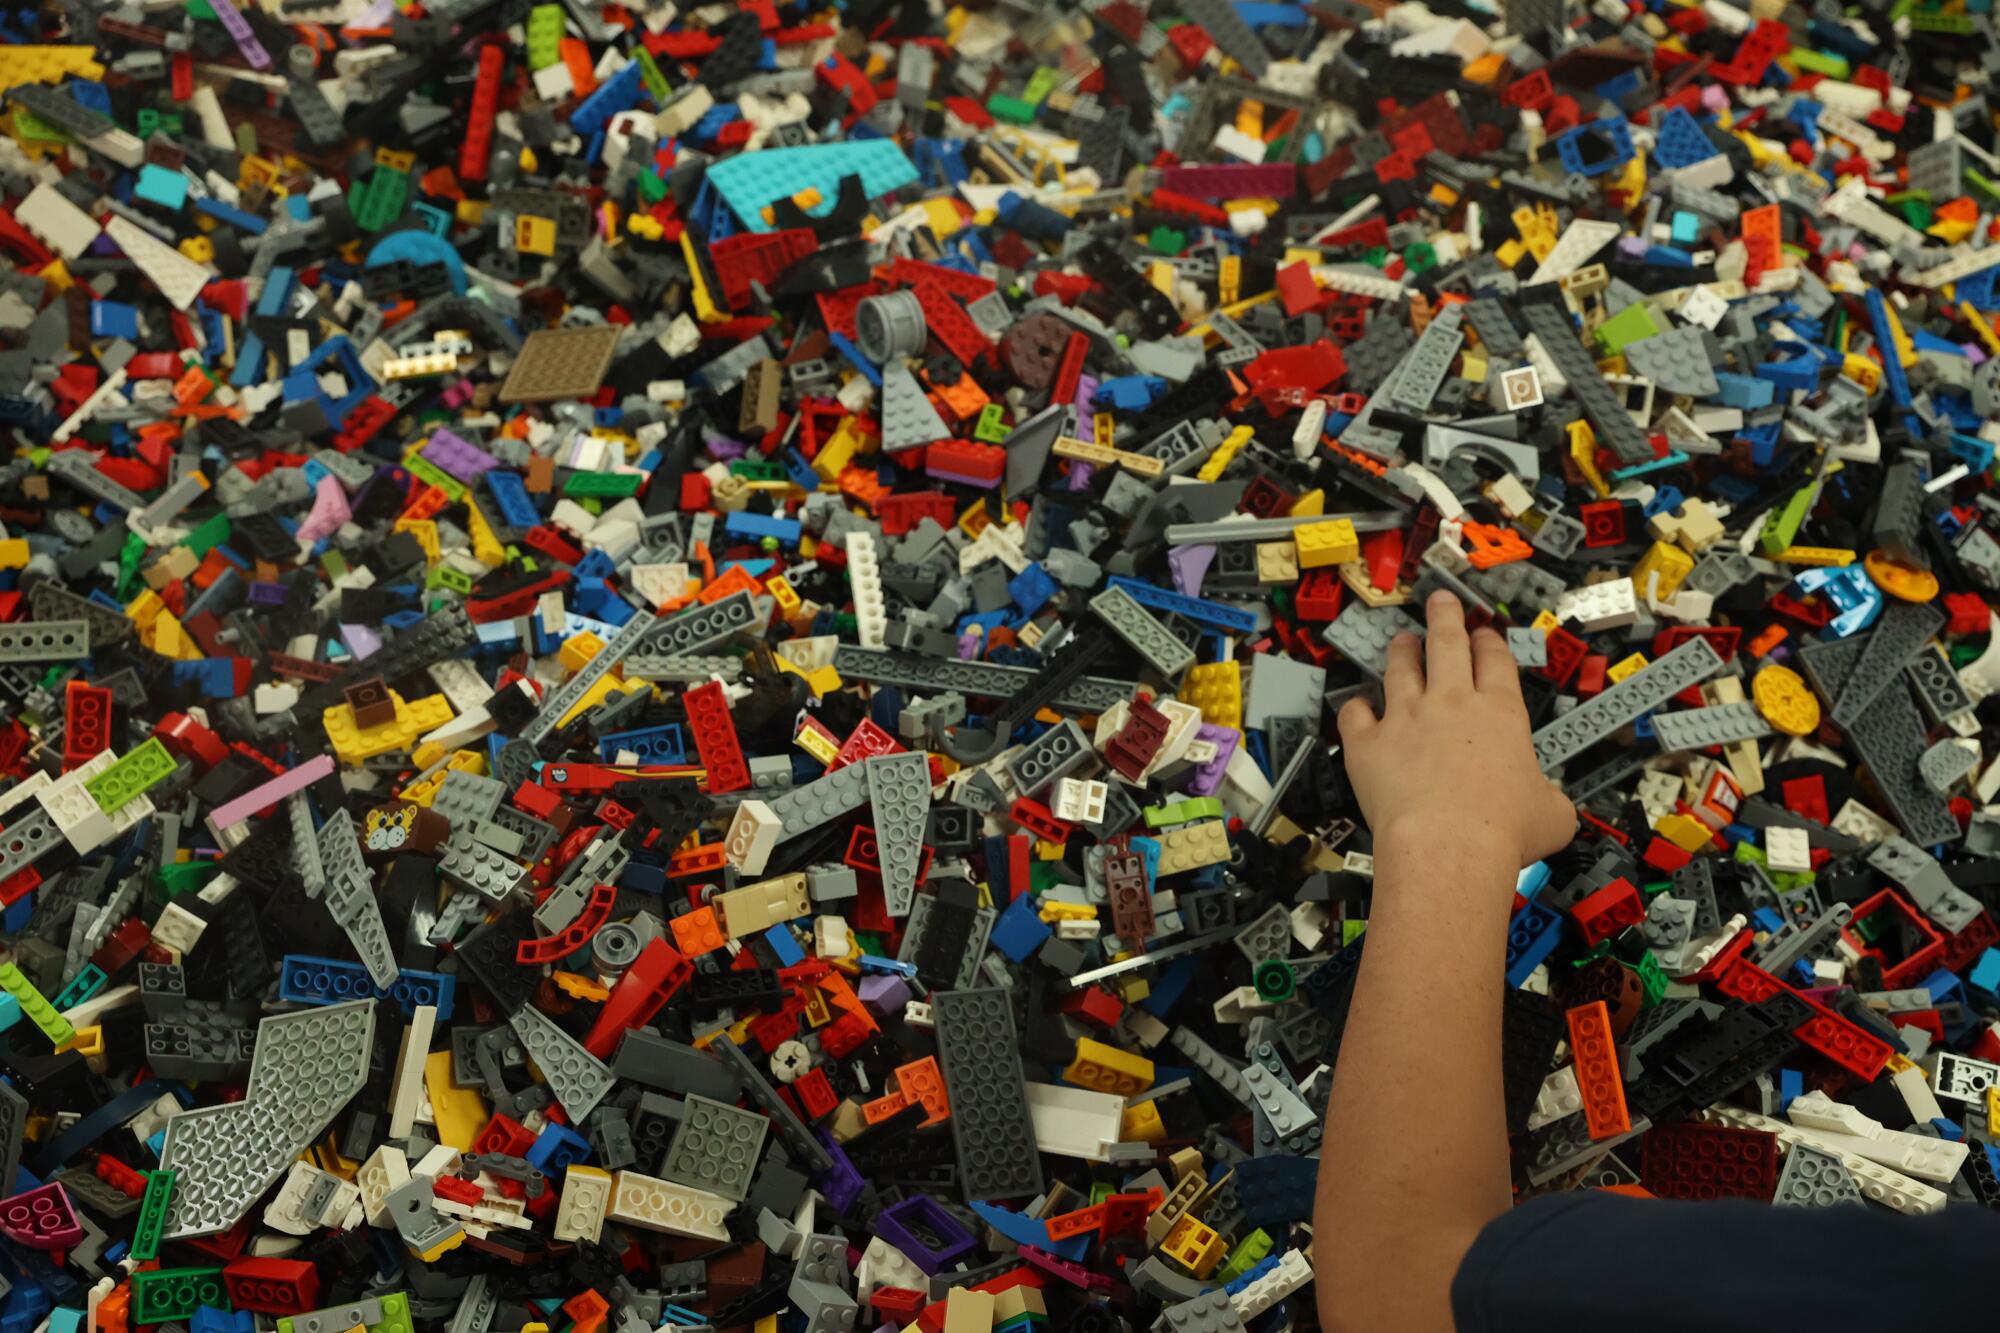 A child's arm sorting through a pile of loose Lego pieces